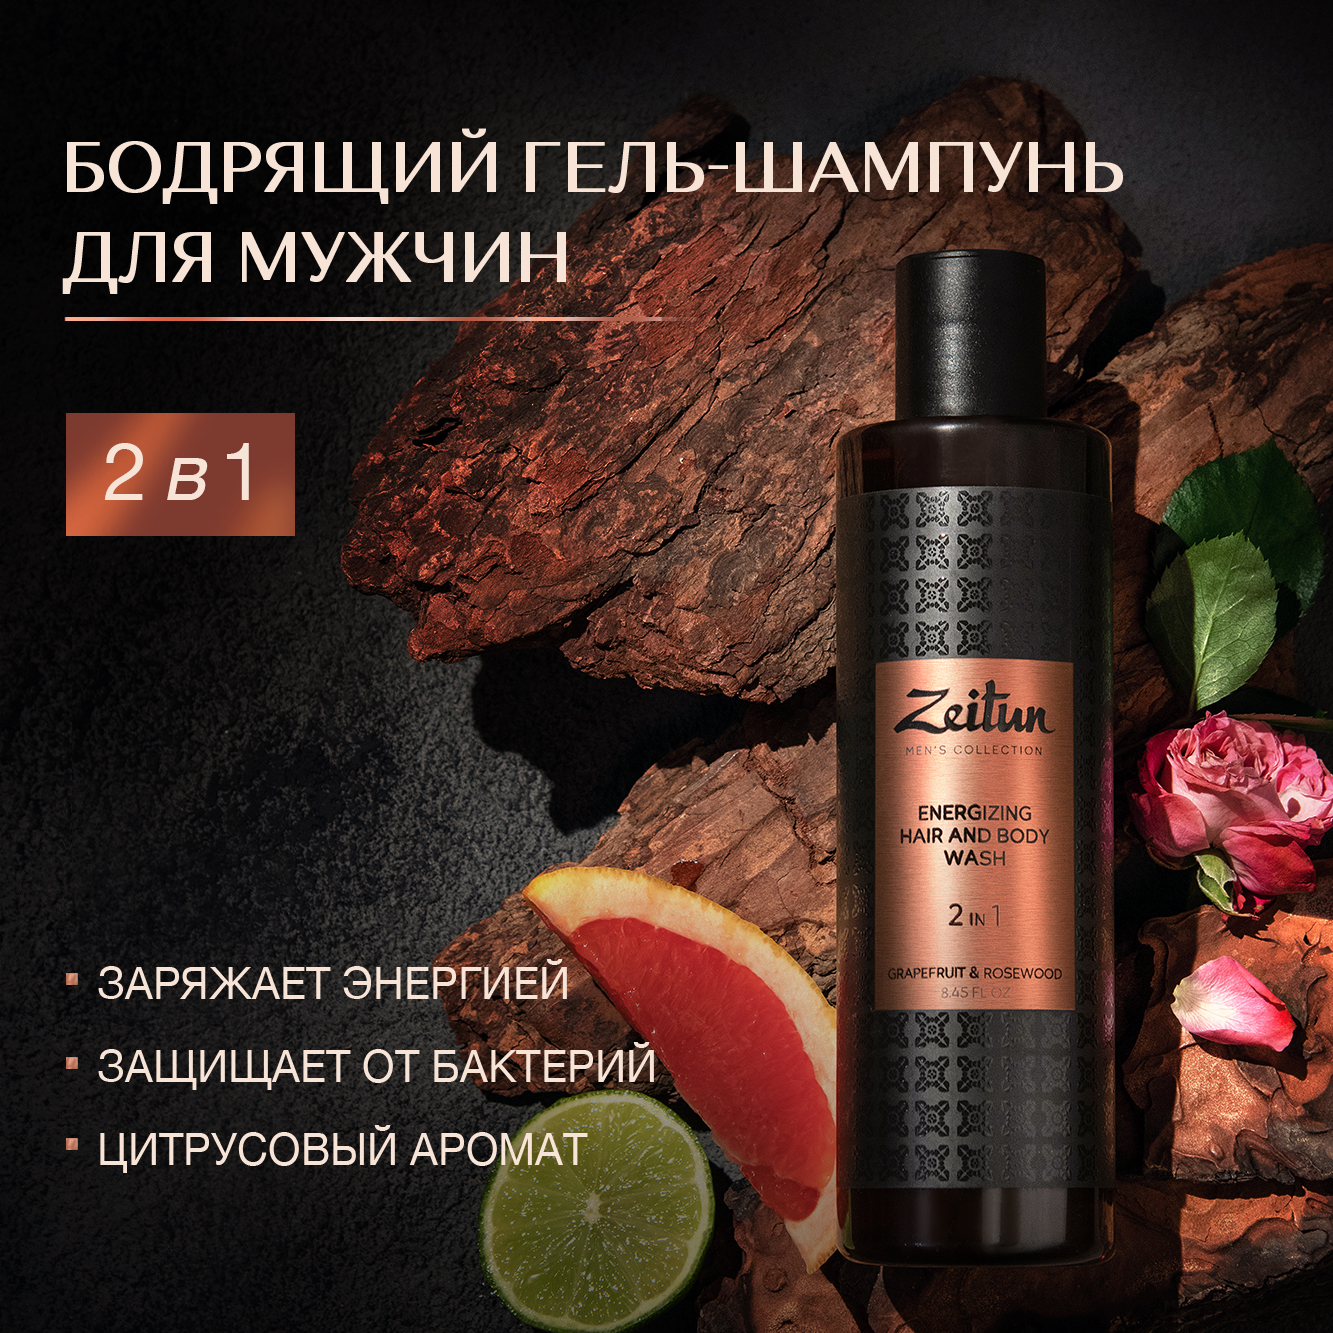 Шампунь Zeitun Grapefruit & Rosewood Energizing Hair and Body Wash 250 мл paint brush artist painting brushes set sheep hair bristles wash brush for watercolor wash ceramic and pottery painting